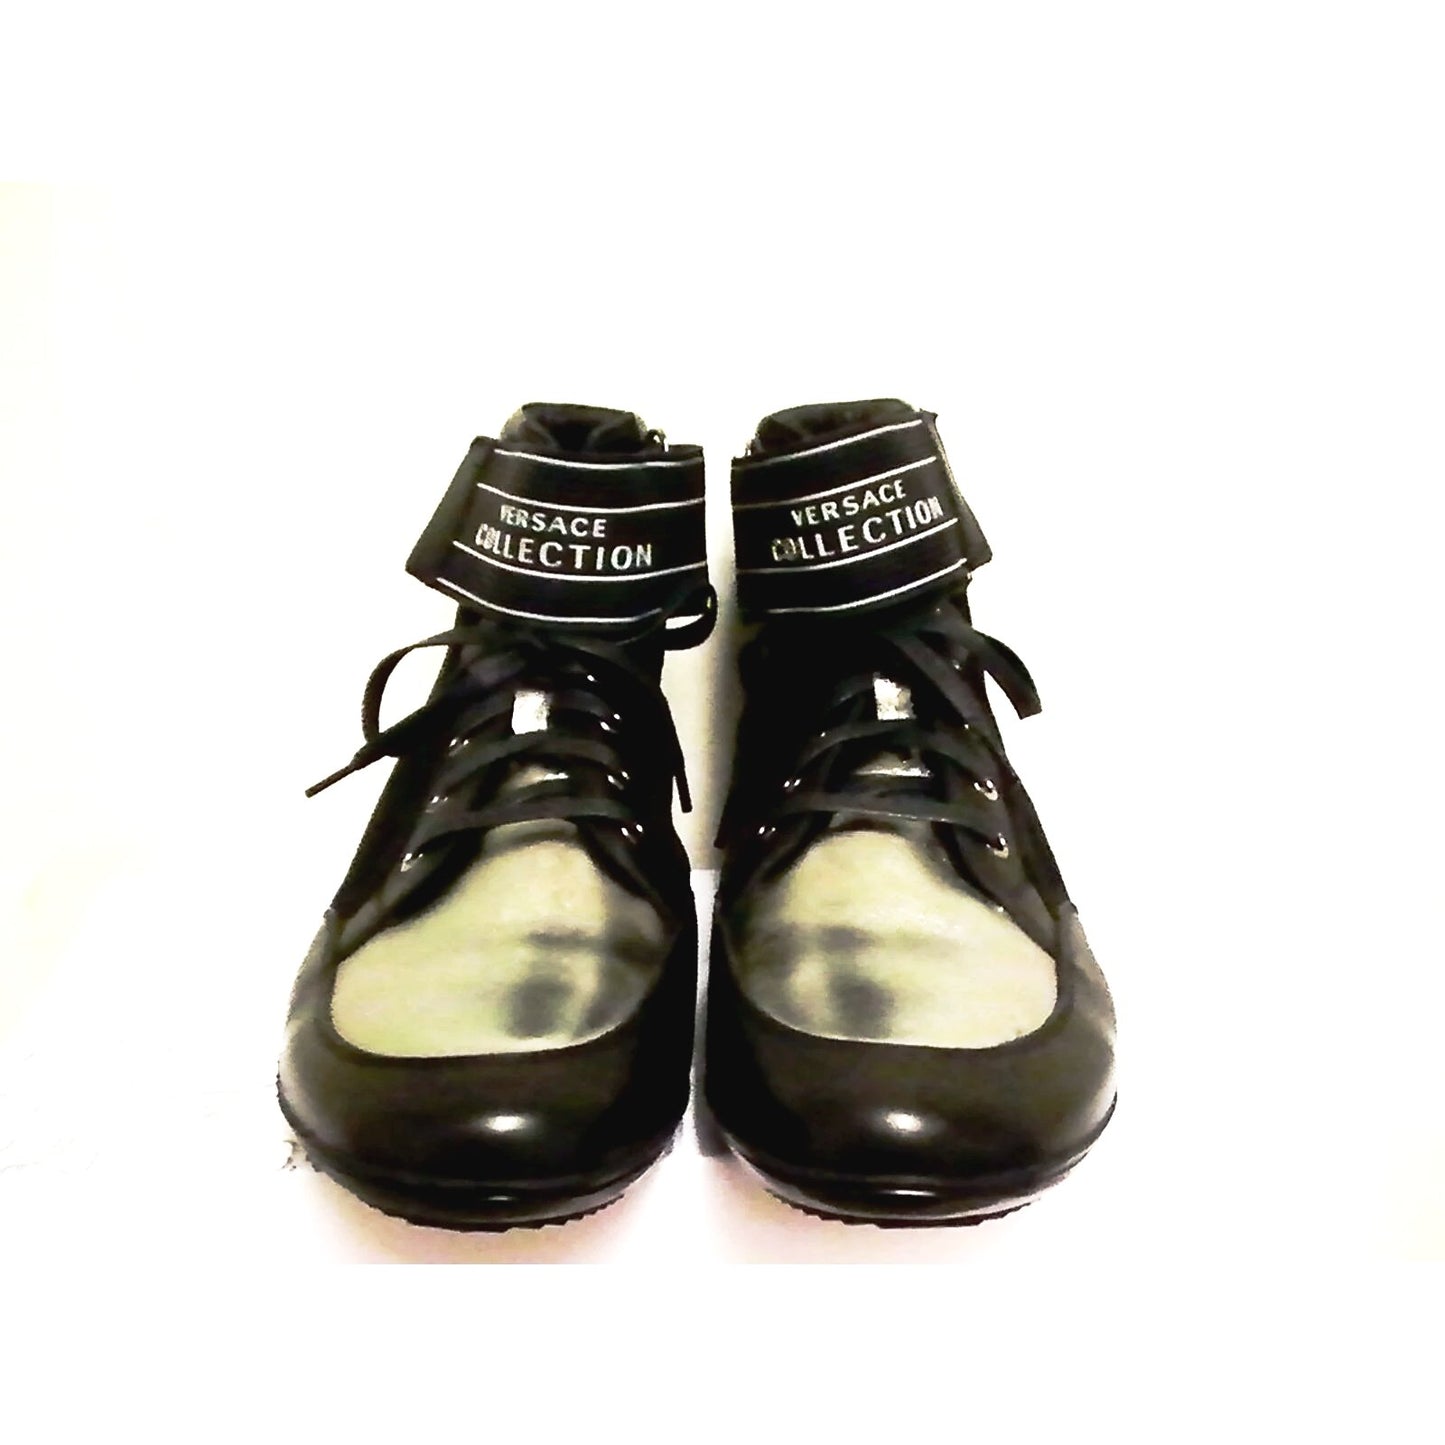 Versace mens shoes collection casual High size 39 euro new with box